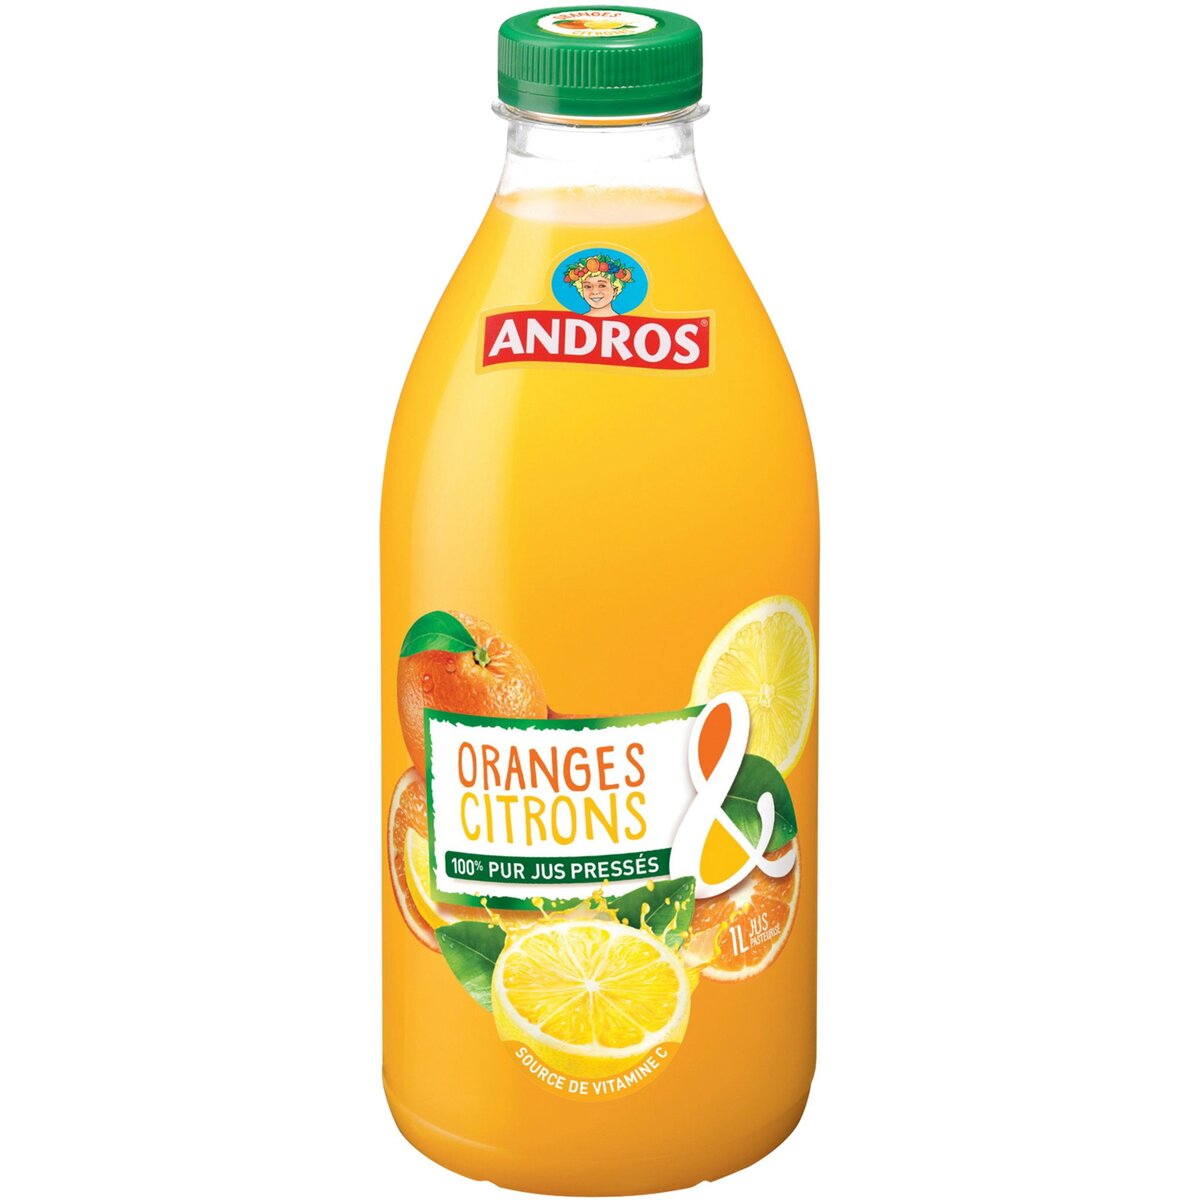 ANDROS Andros jus d'oranges et citrons 1l